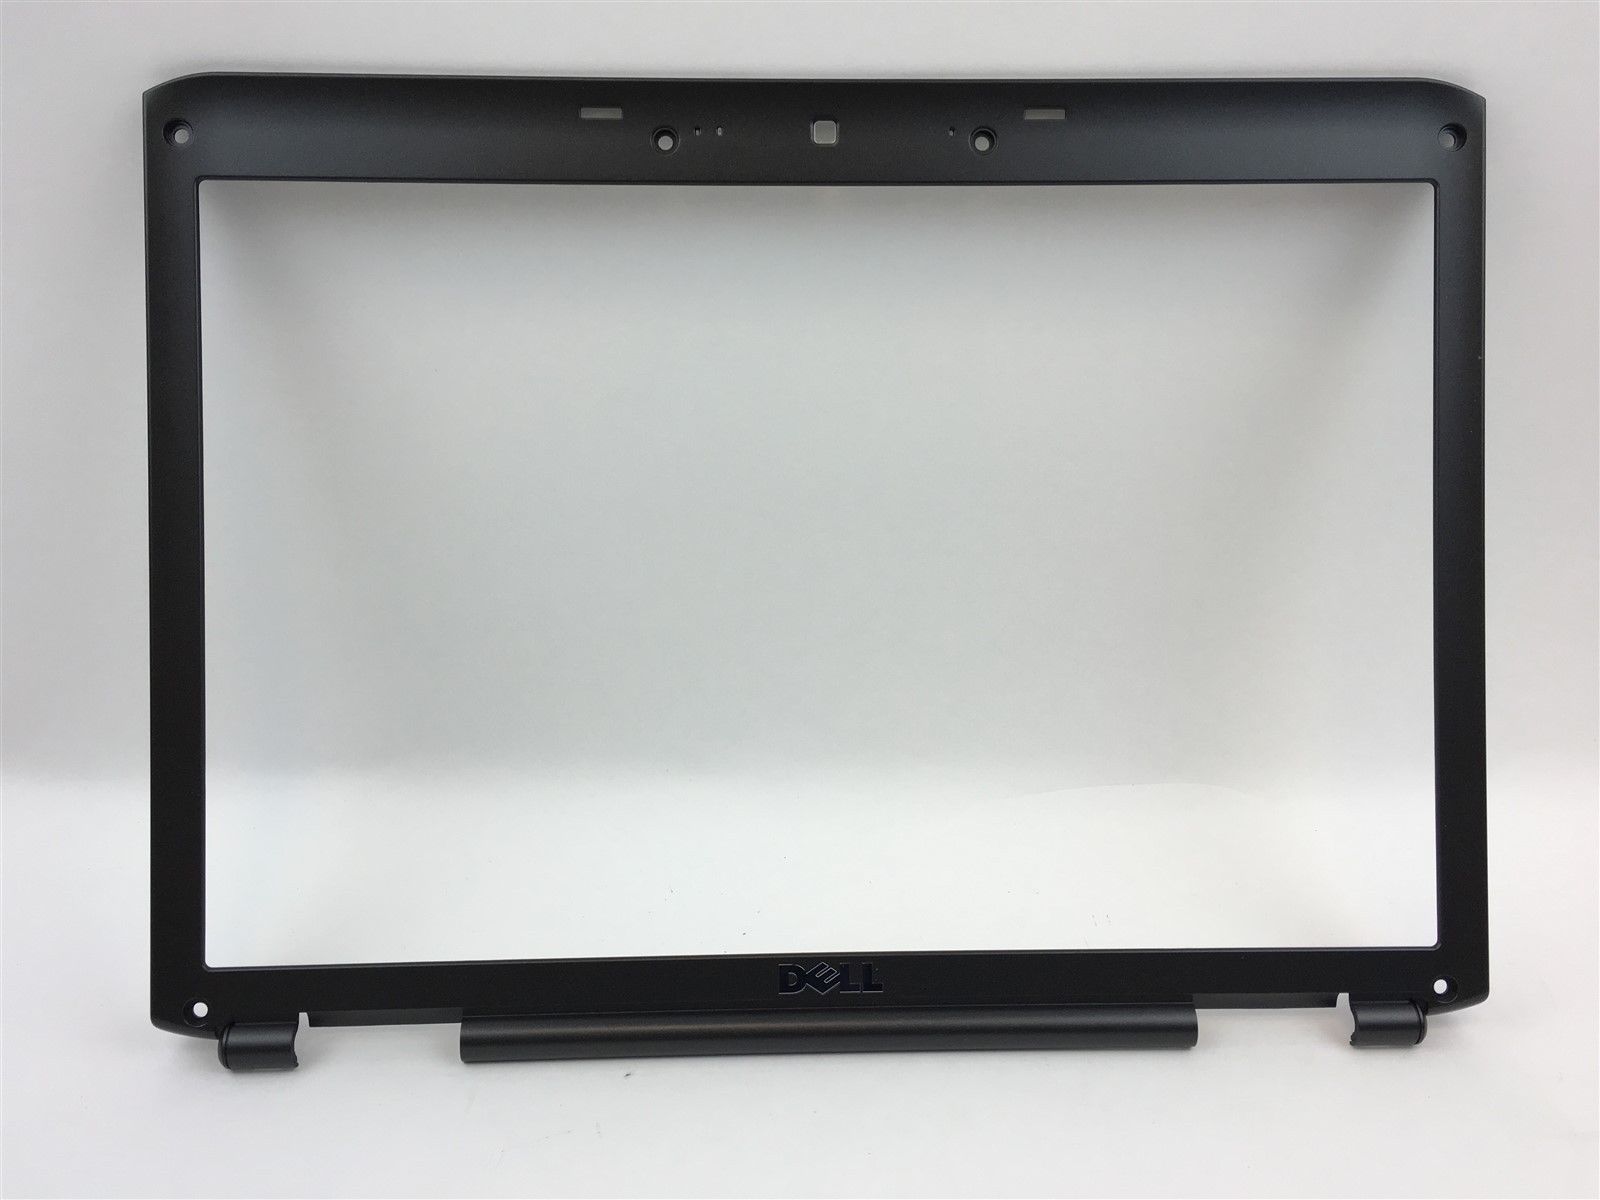 Genuine Dell Vostro 1500 LCD Front Bezel Trim with Cam Assembly UU507 0UU507